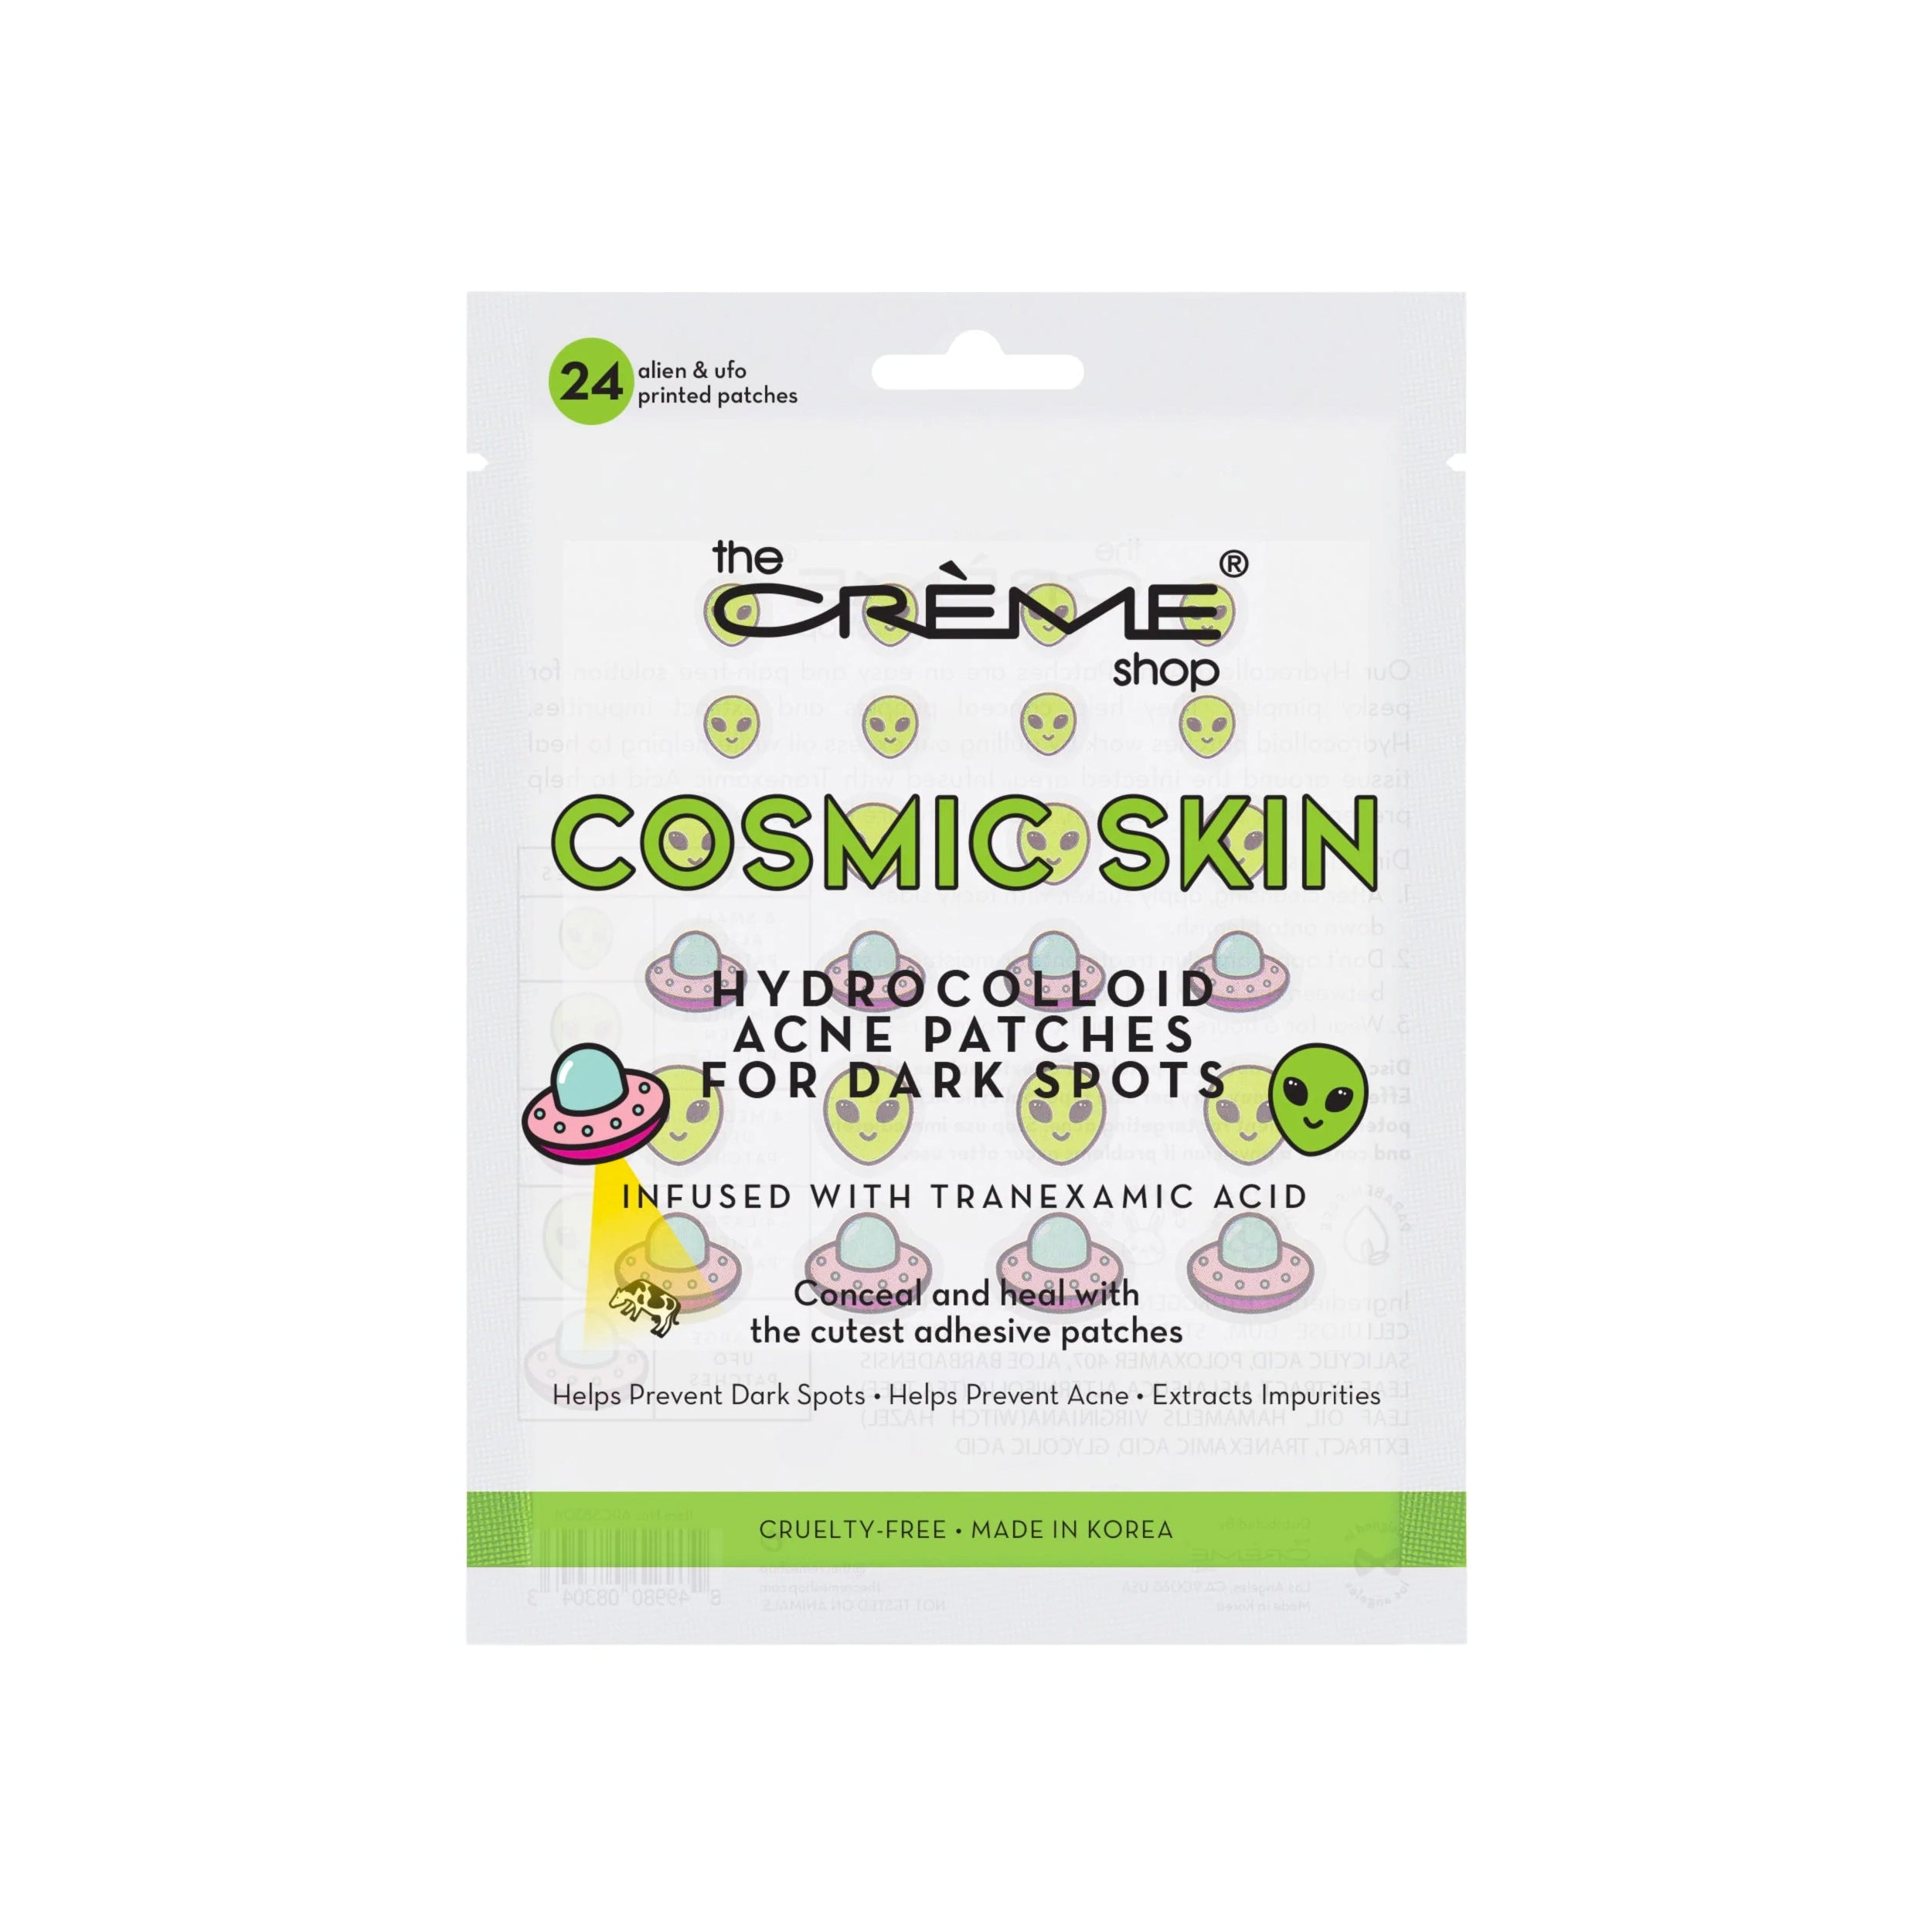 The Creme Shop Cosmic Skin Hydrocolloid Acne Patches Beauty The Creme Shop   